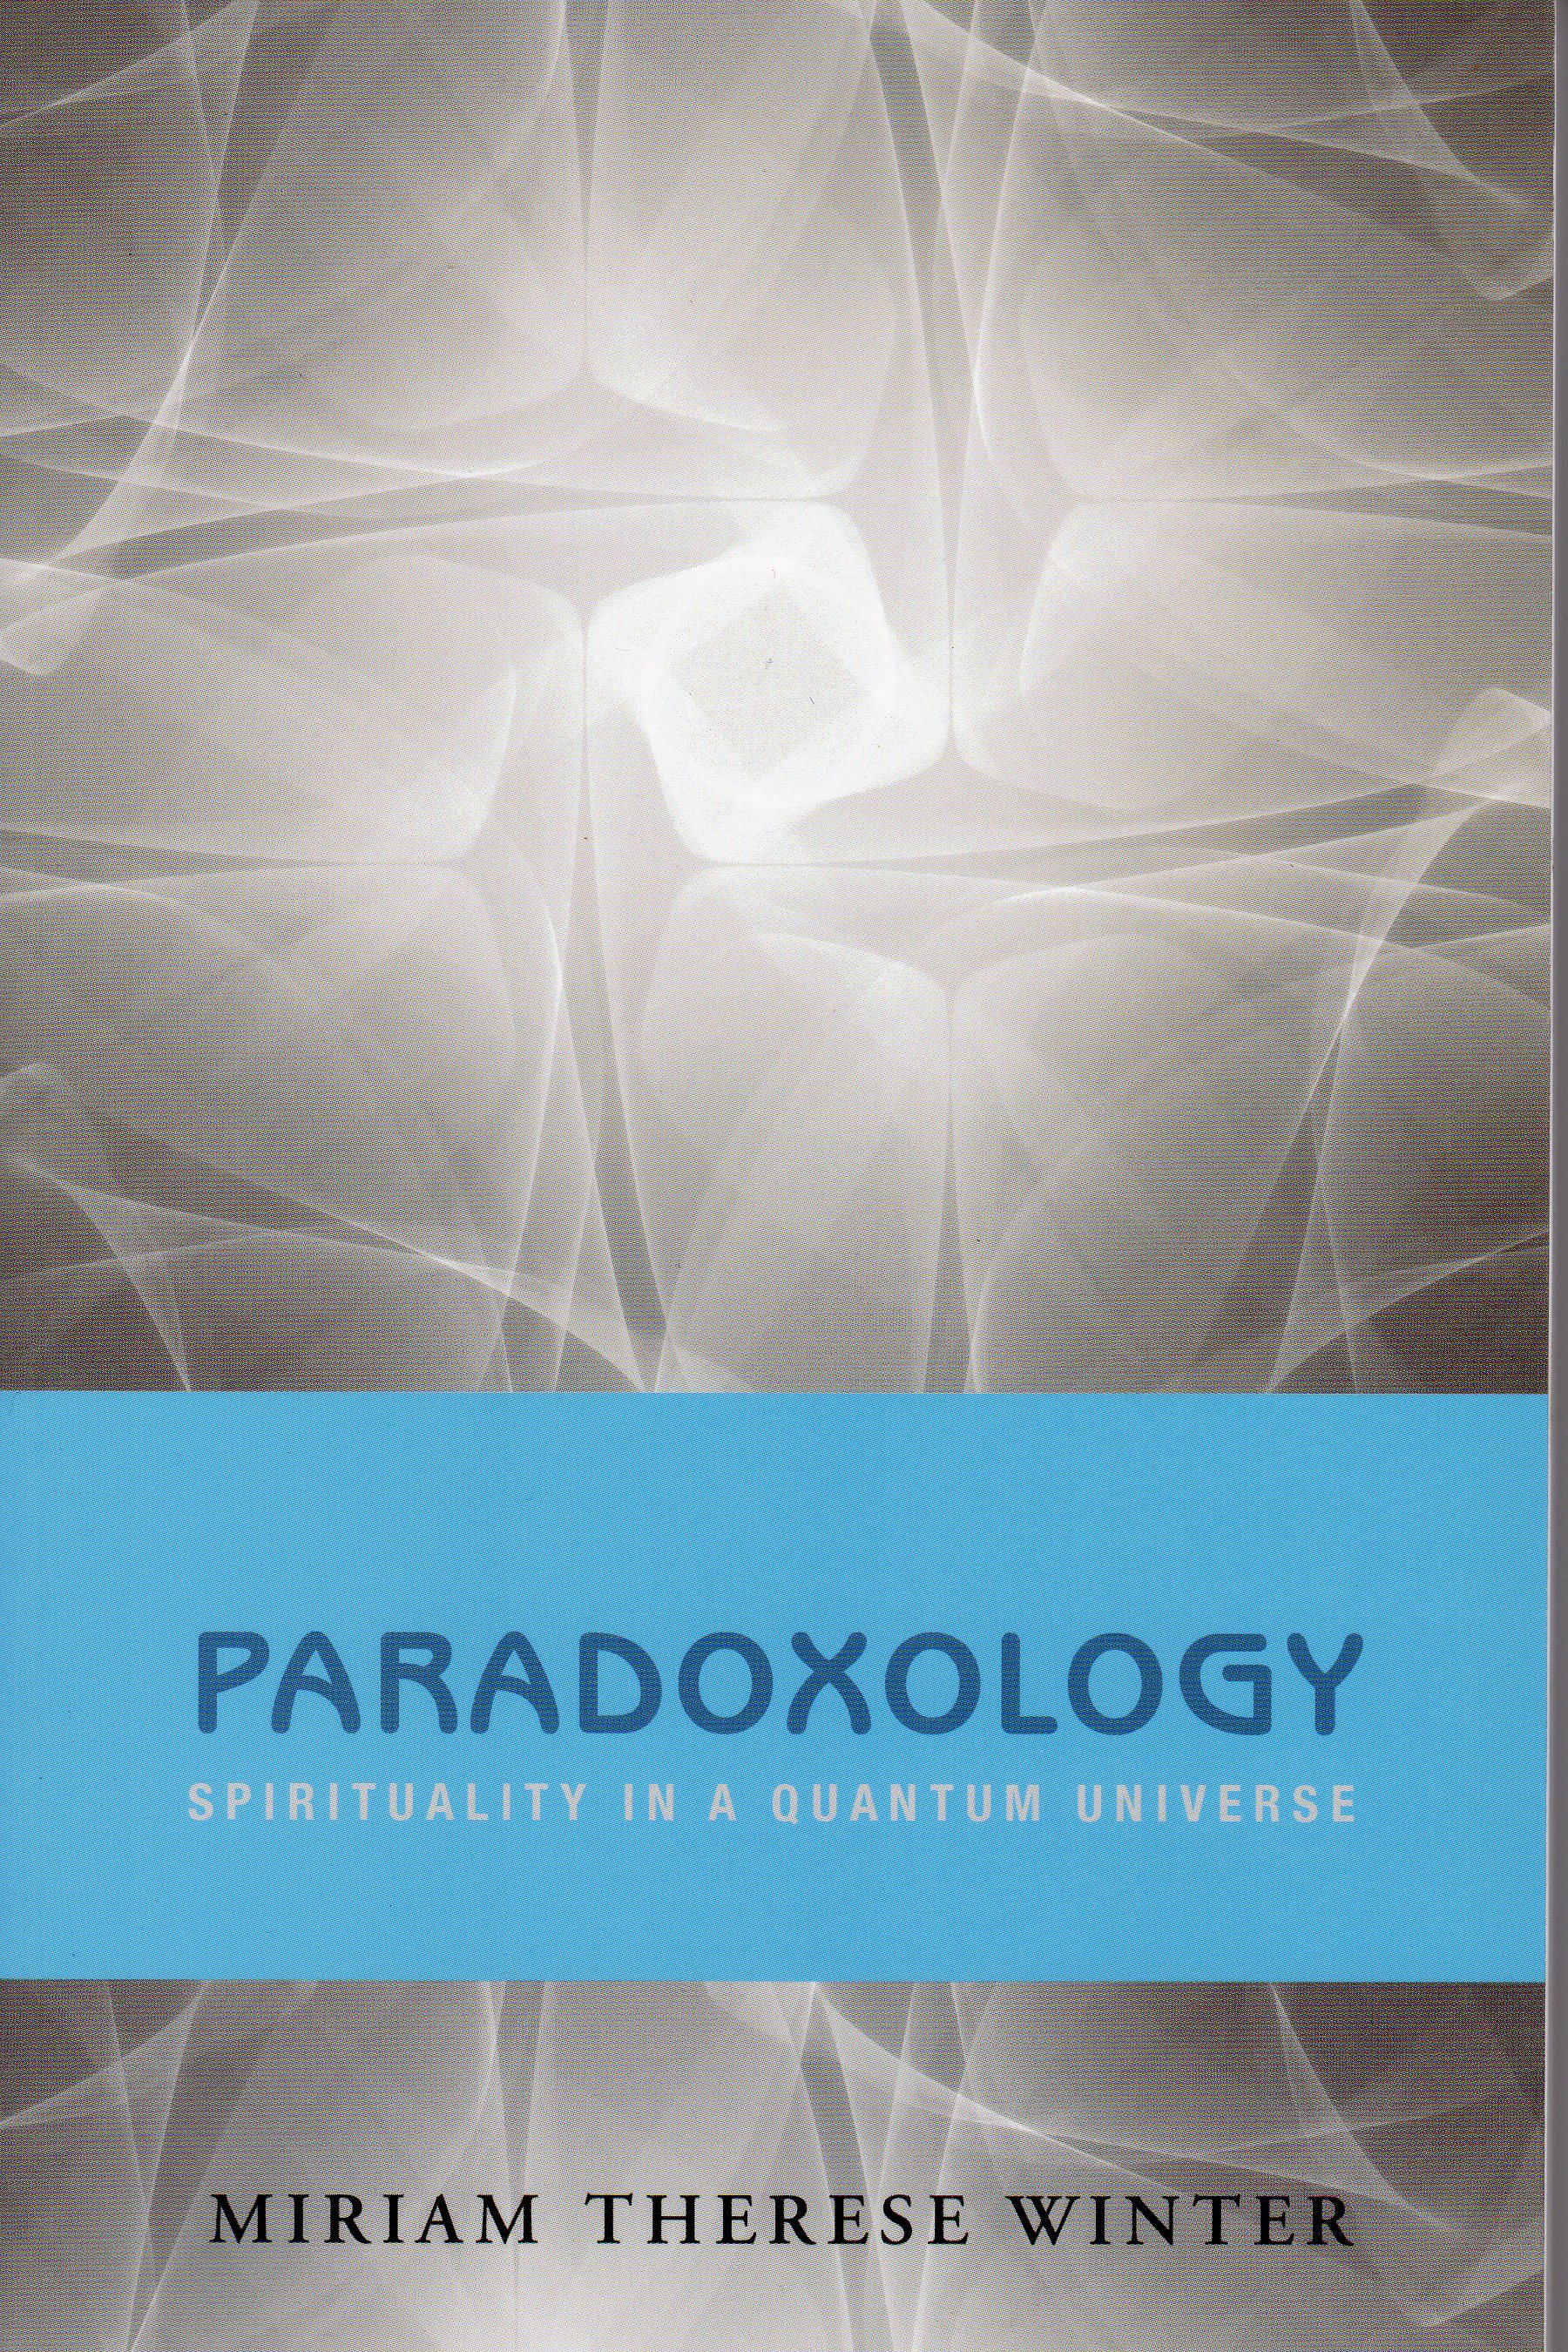 Paradoxology by Sister Miriam Therese Winter